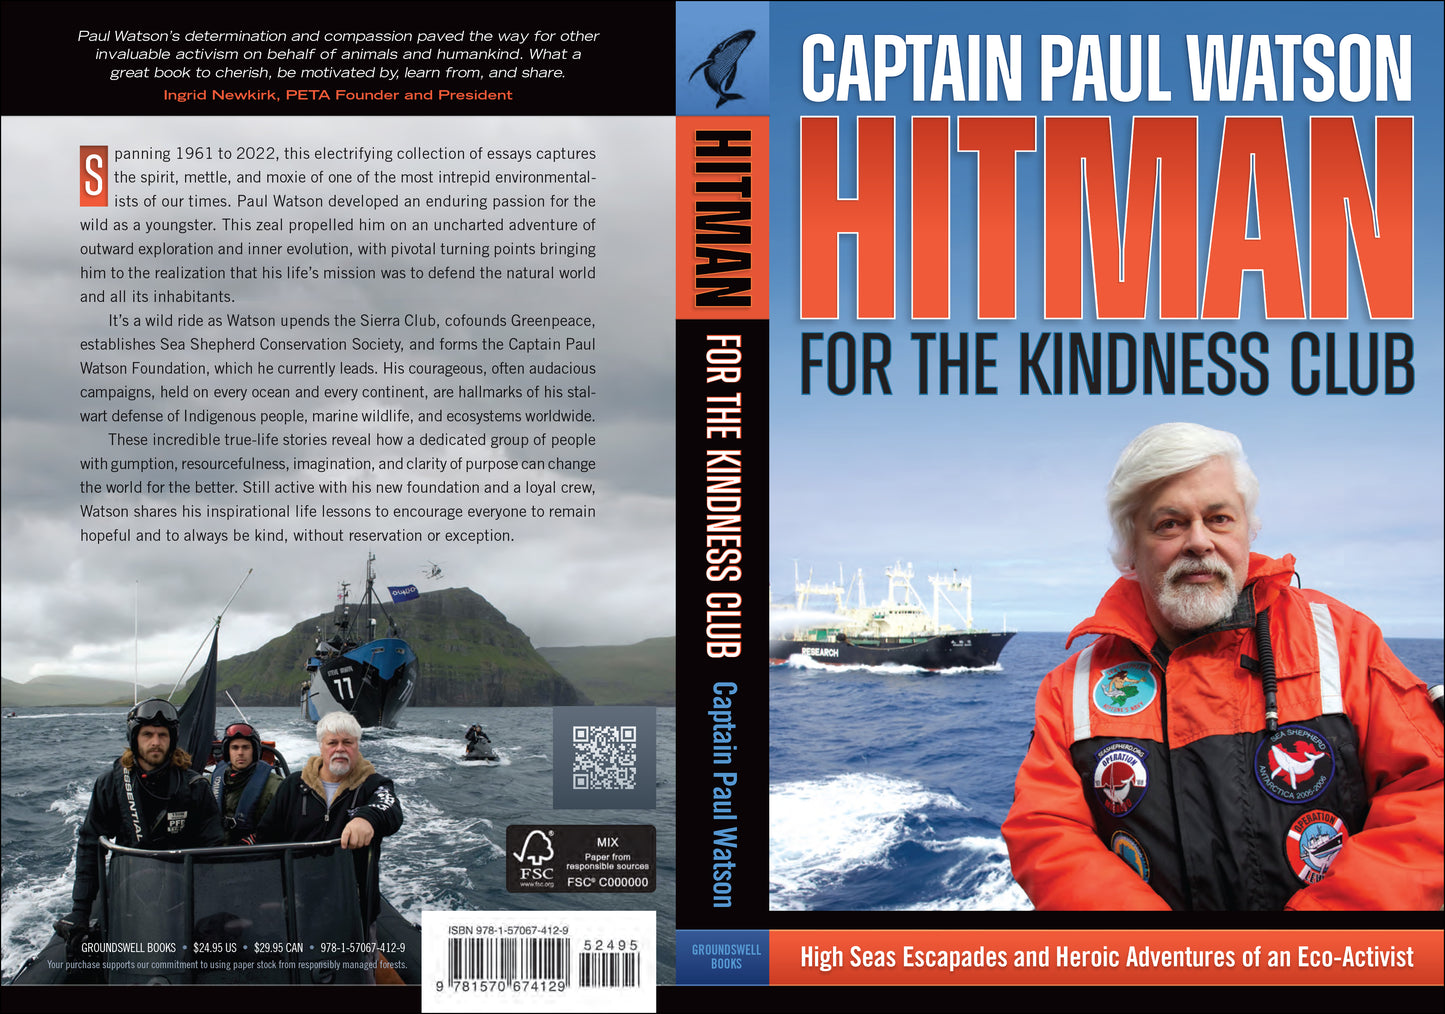 Hitman for the Kindness Club: High Seas Escapades and Heroic Adventures of an Eco-Activist